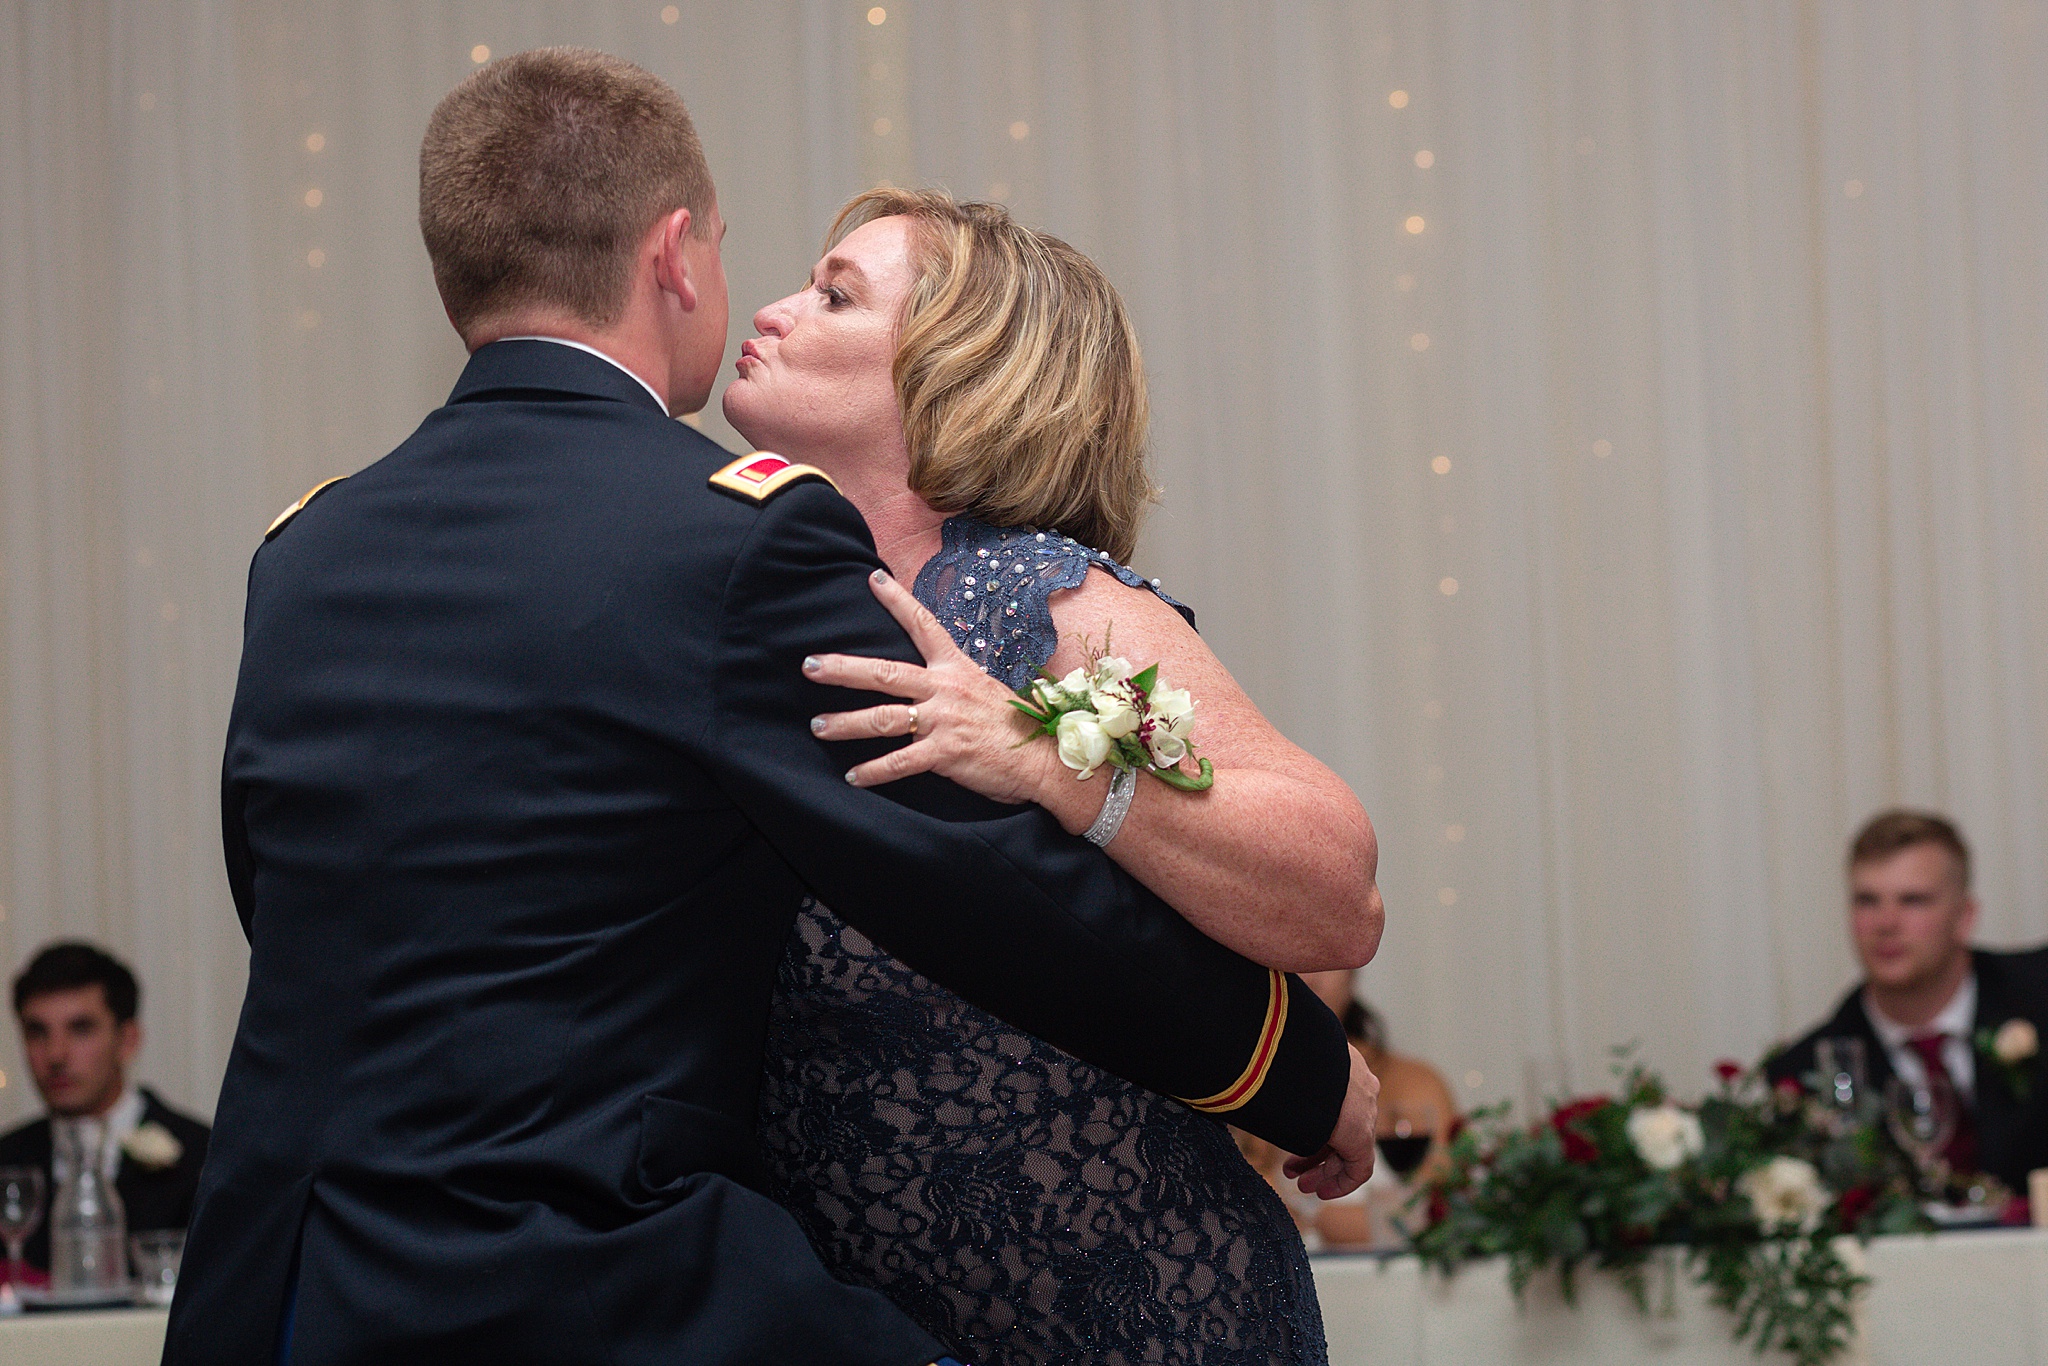 Mother & Son dancing during the wedding reception. Tania & Chris' Denver Wedding at the Wedgewood Ken Caryl by Colorado Wedding Photography, Jennifer Garza. Colorado Wedding Photographer, Colorado Wedding Photography, Denver Wedding Photographer, Denver Wedding Photography, US Marine Corp Wedding, US Marine Corp, Military Wedding, US Marines, Wedgewood Weddings, Wedgewood Weddings Ken Caryl, Colorado Wedding, Denver Wedding, Wedding Photographer, Colorado Bride, Brides of Colorado